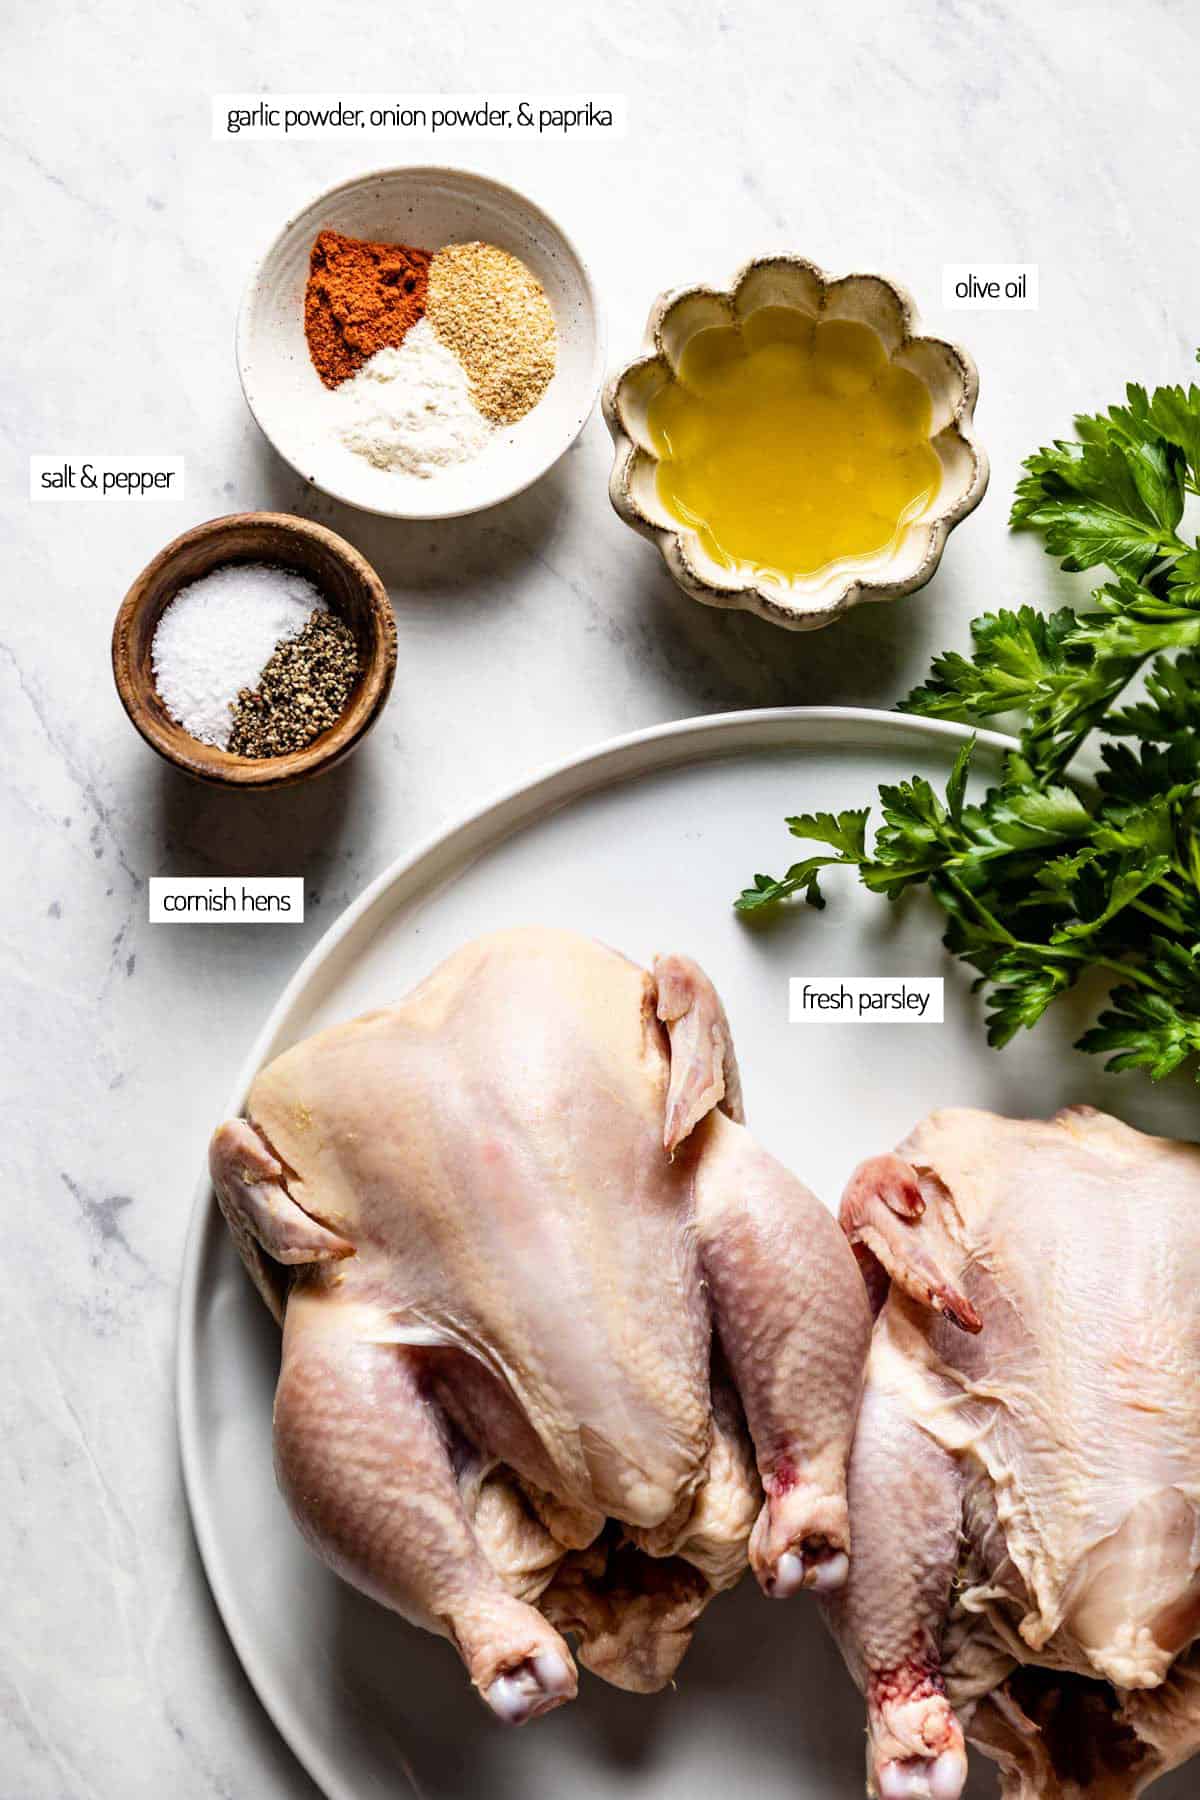 Ingredients for an air fried poultry dish from the top view.